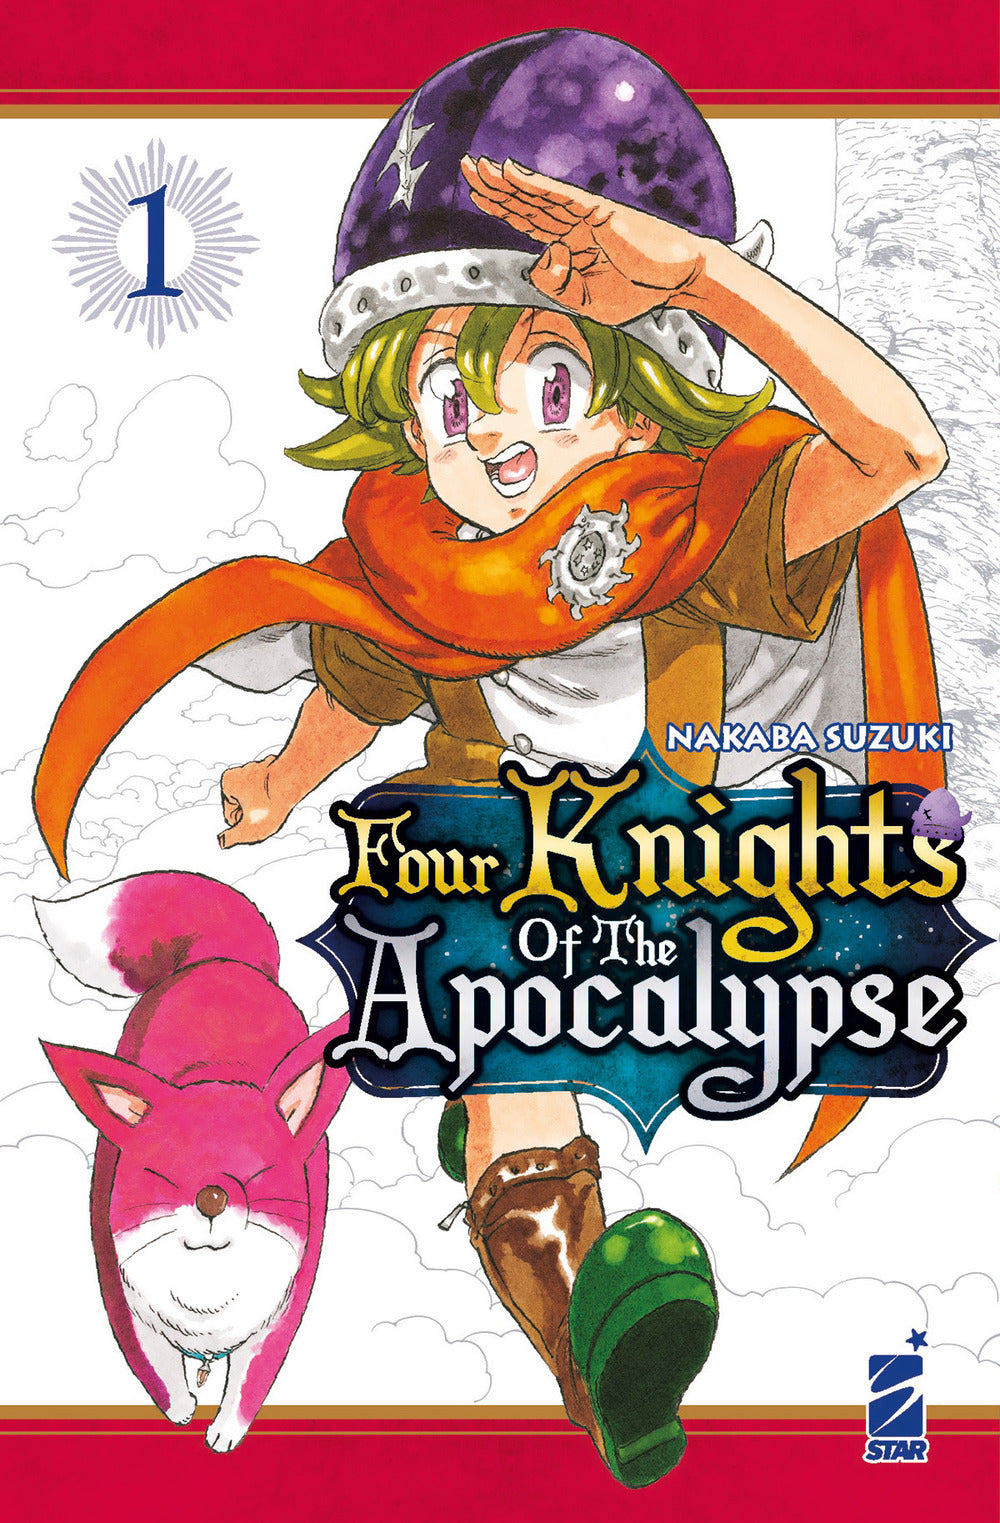 Four knights of the apocalypse. Vol. 1.